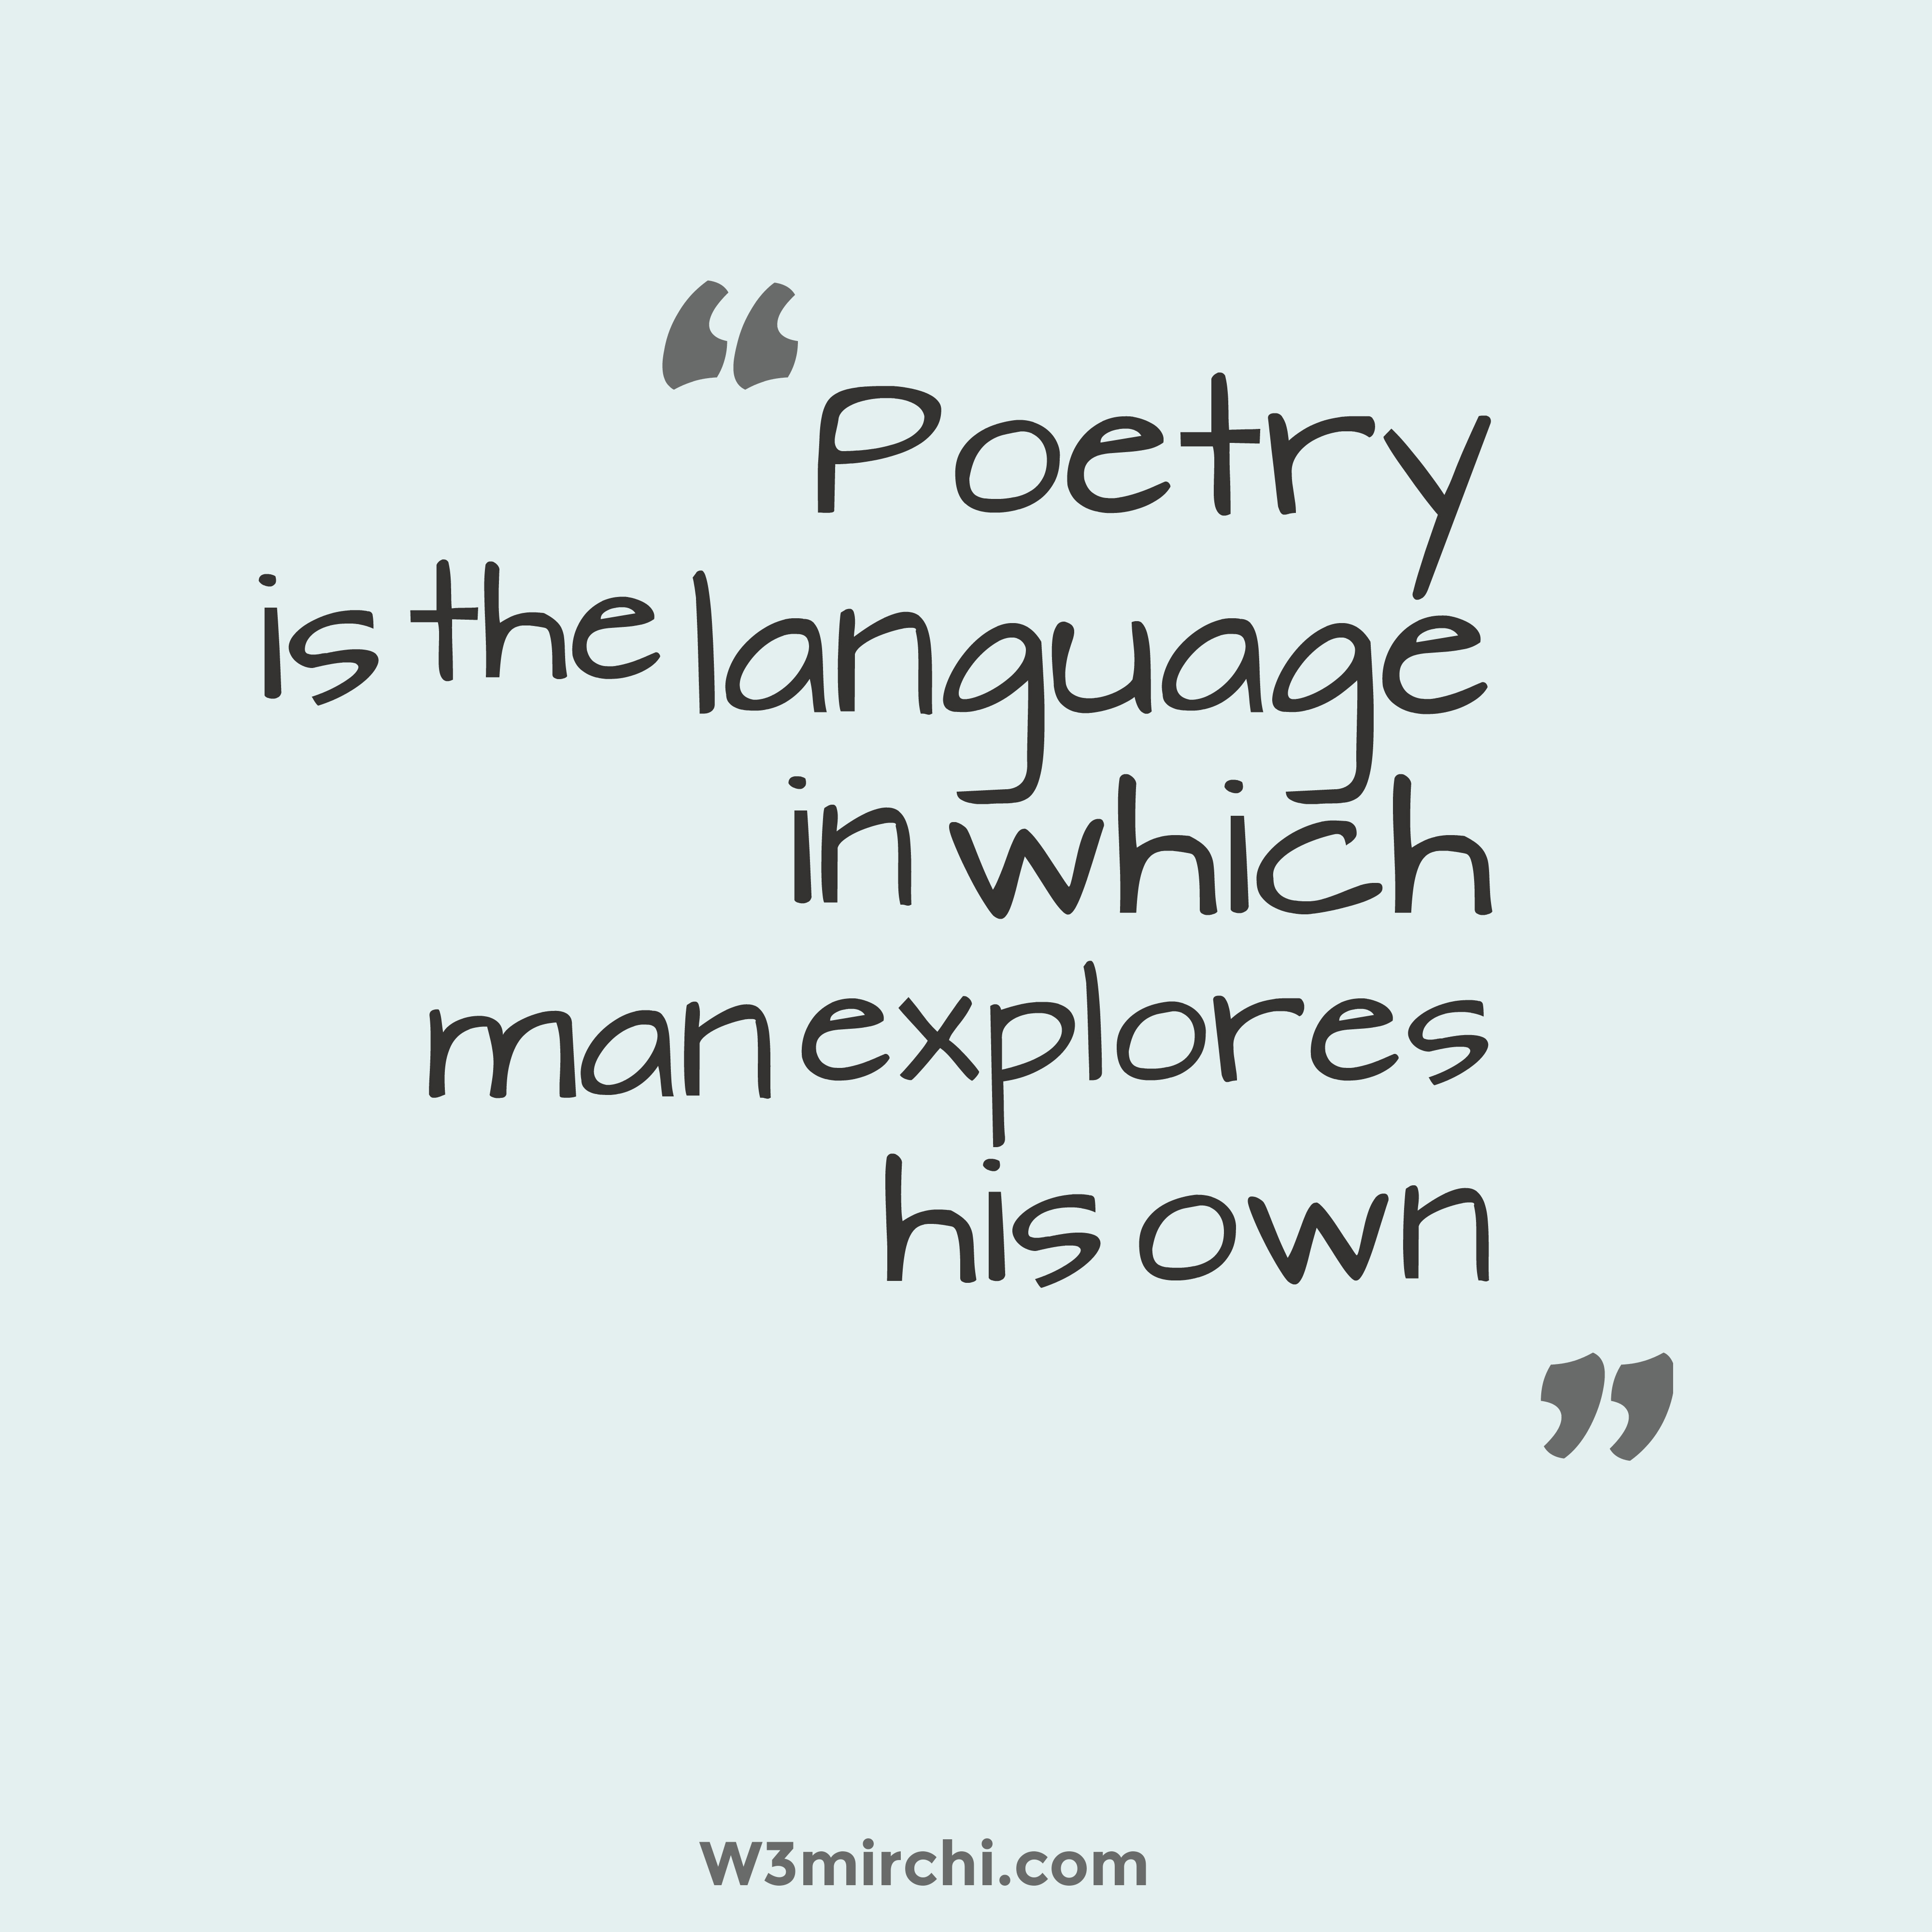 Poetry is the language in which